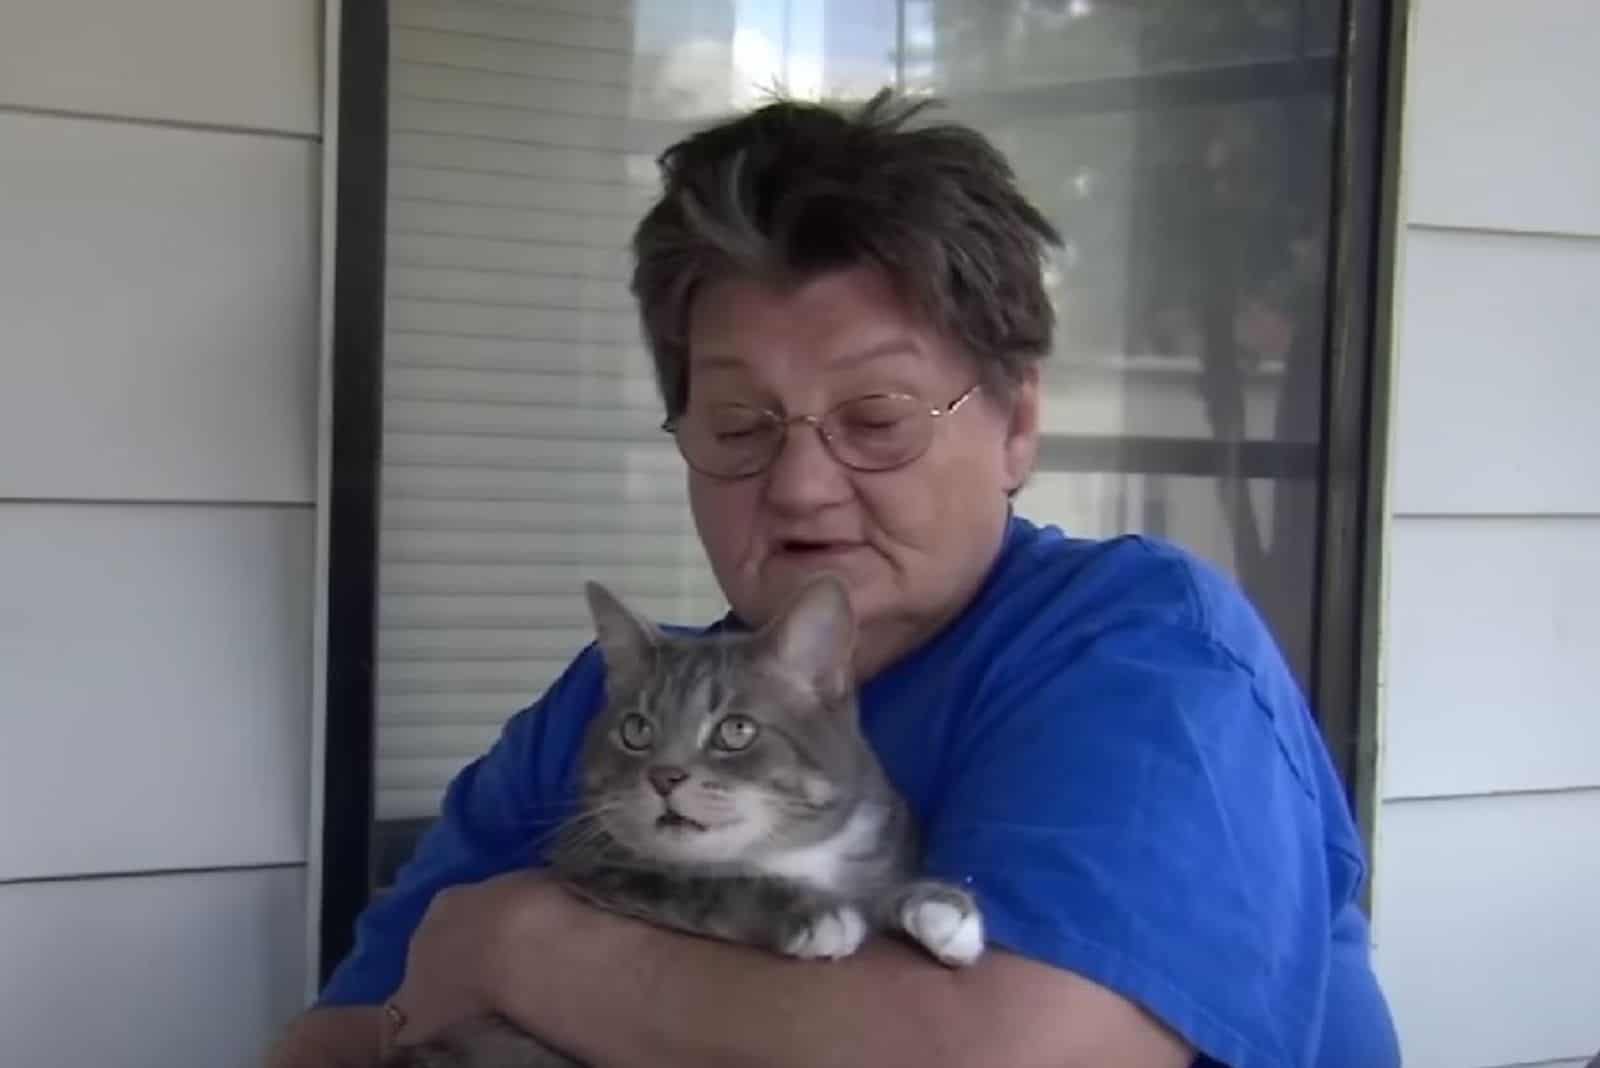 the cat enjoys the woman's arms